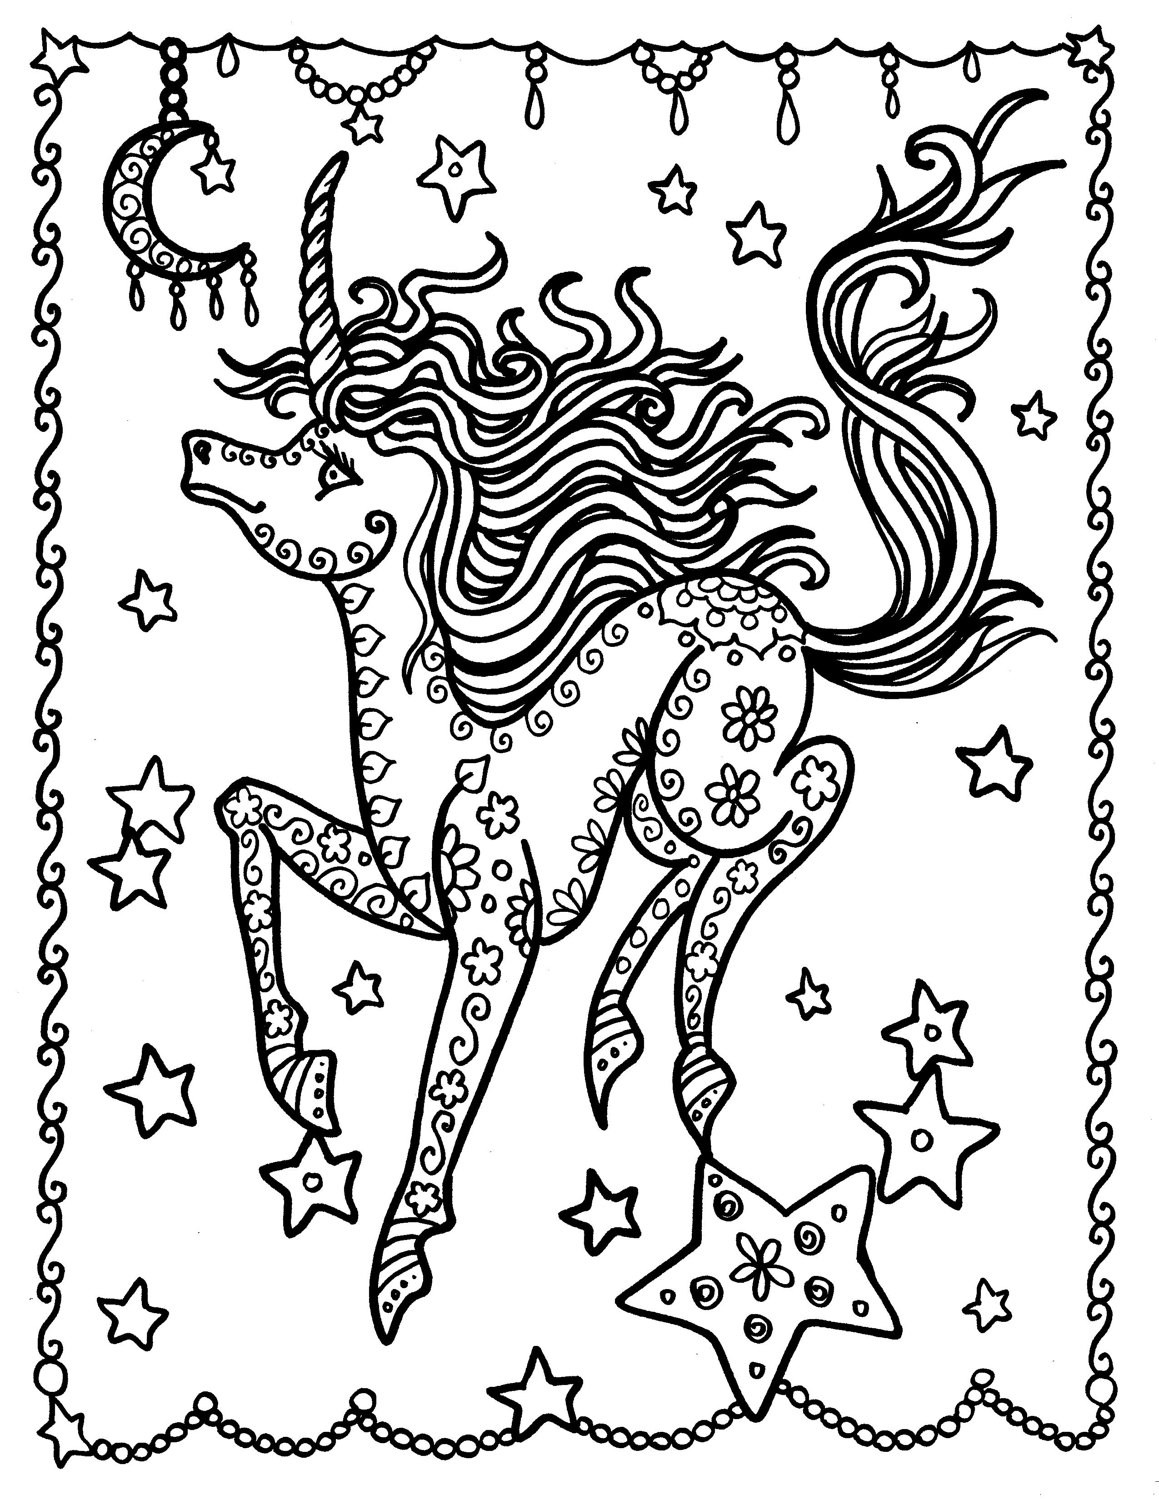 Unicorn Coloring Pages For Adults
 Unicorn Baby Coloring Page Fantasy coloring pages Adult